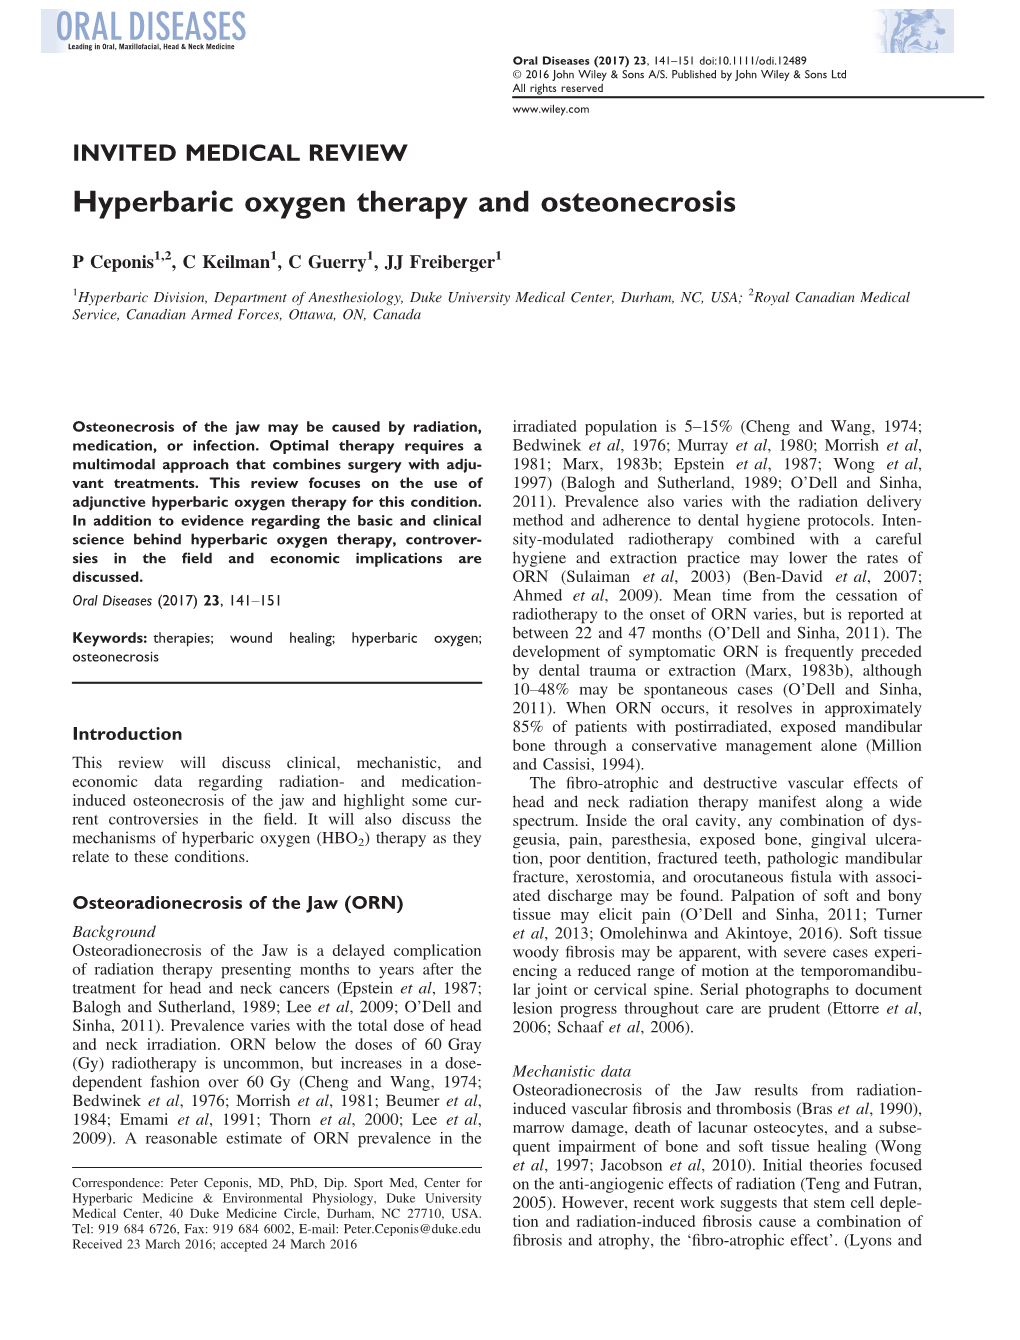 Hyperbaric Oxygen Therapy and Osteonecrosis